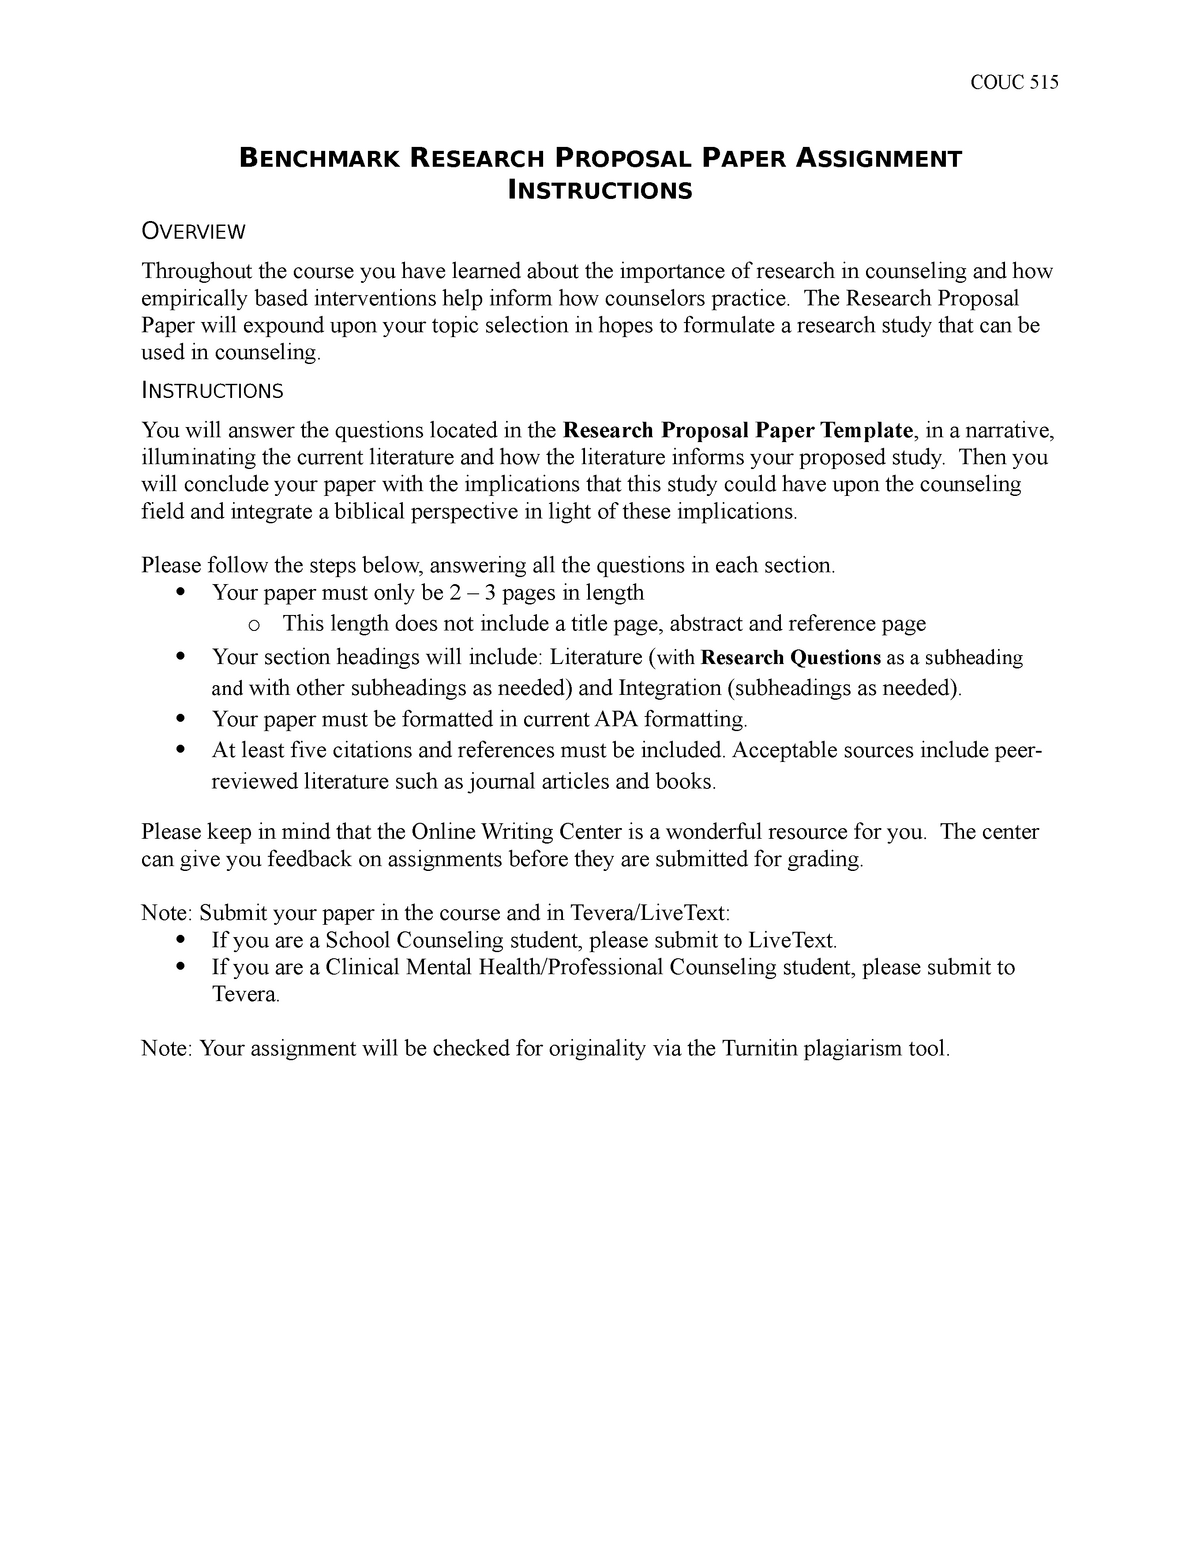 benchmark research proposal paper assignment couc 515